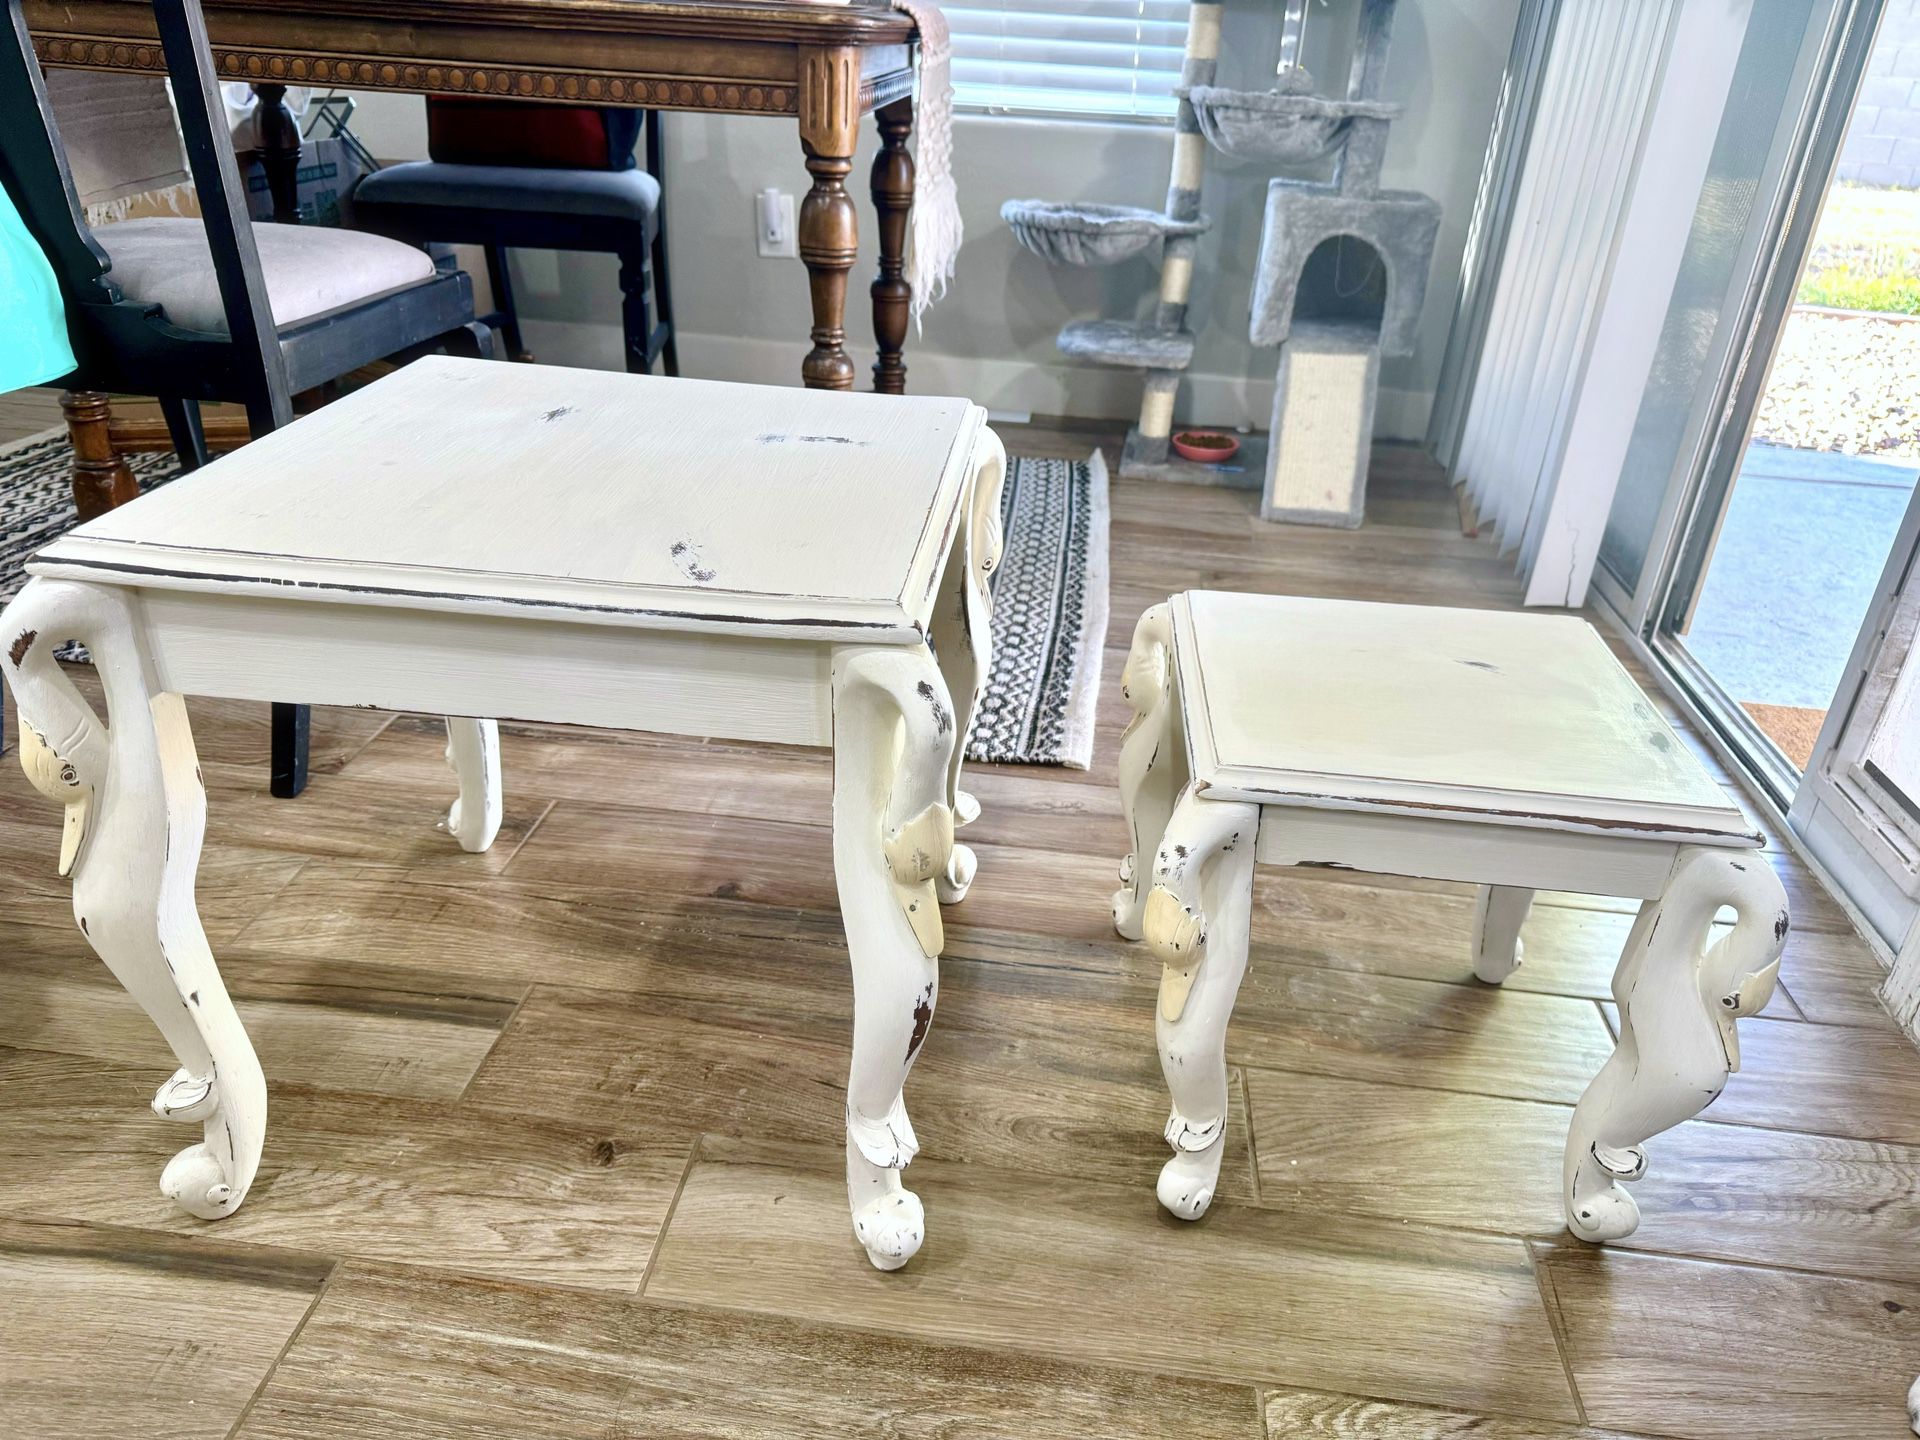 Two white Swan Nesting Tables 